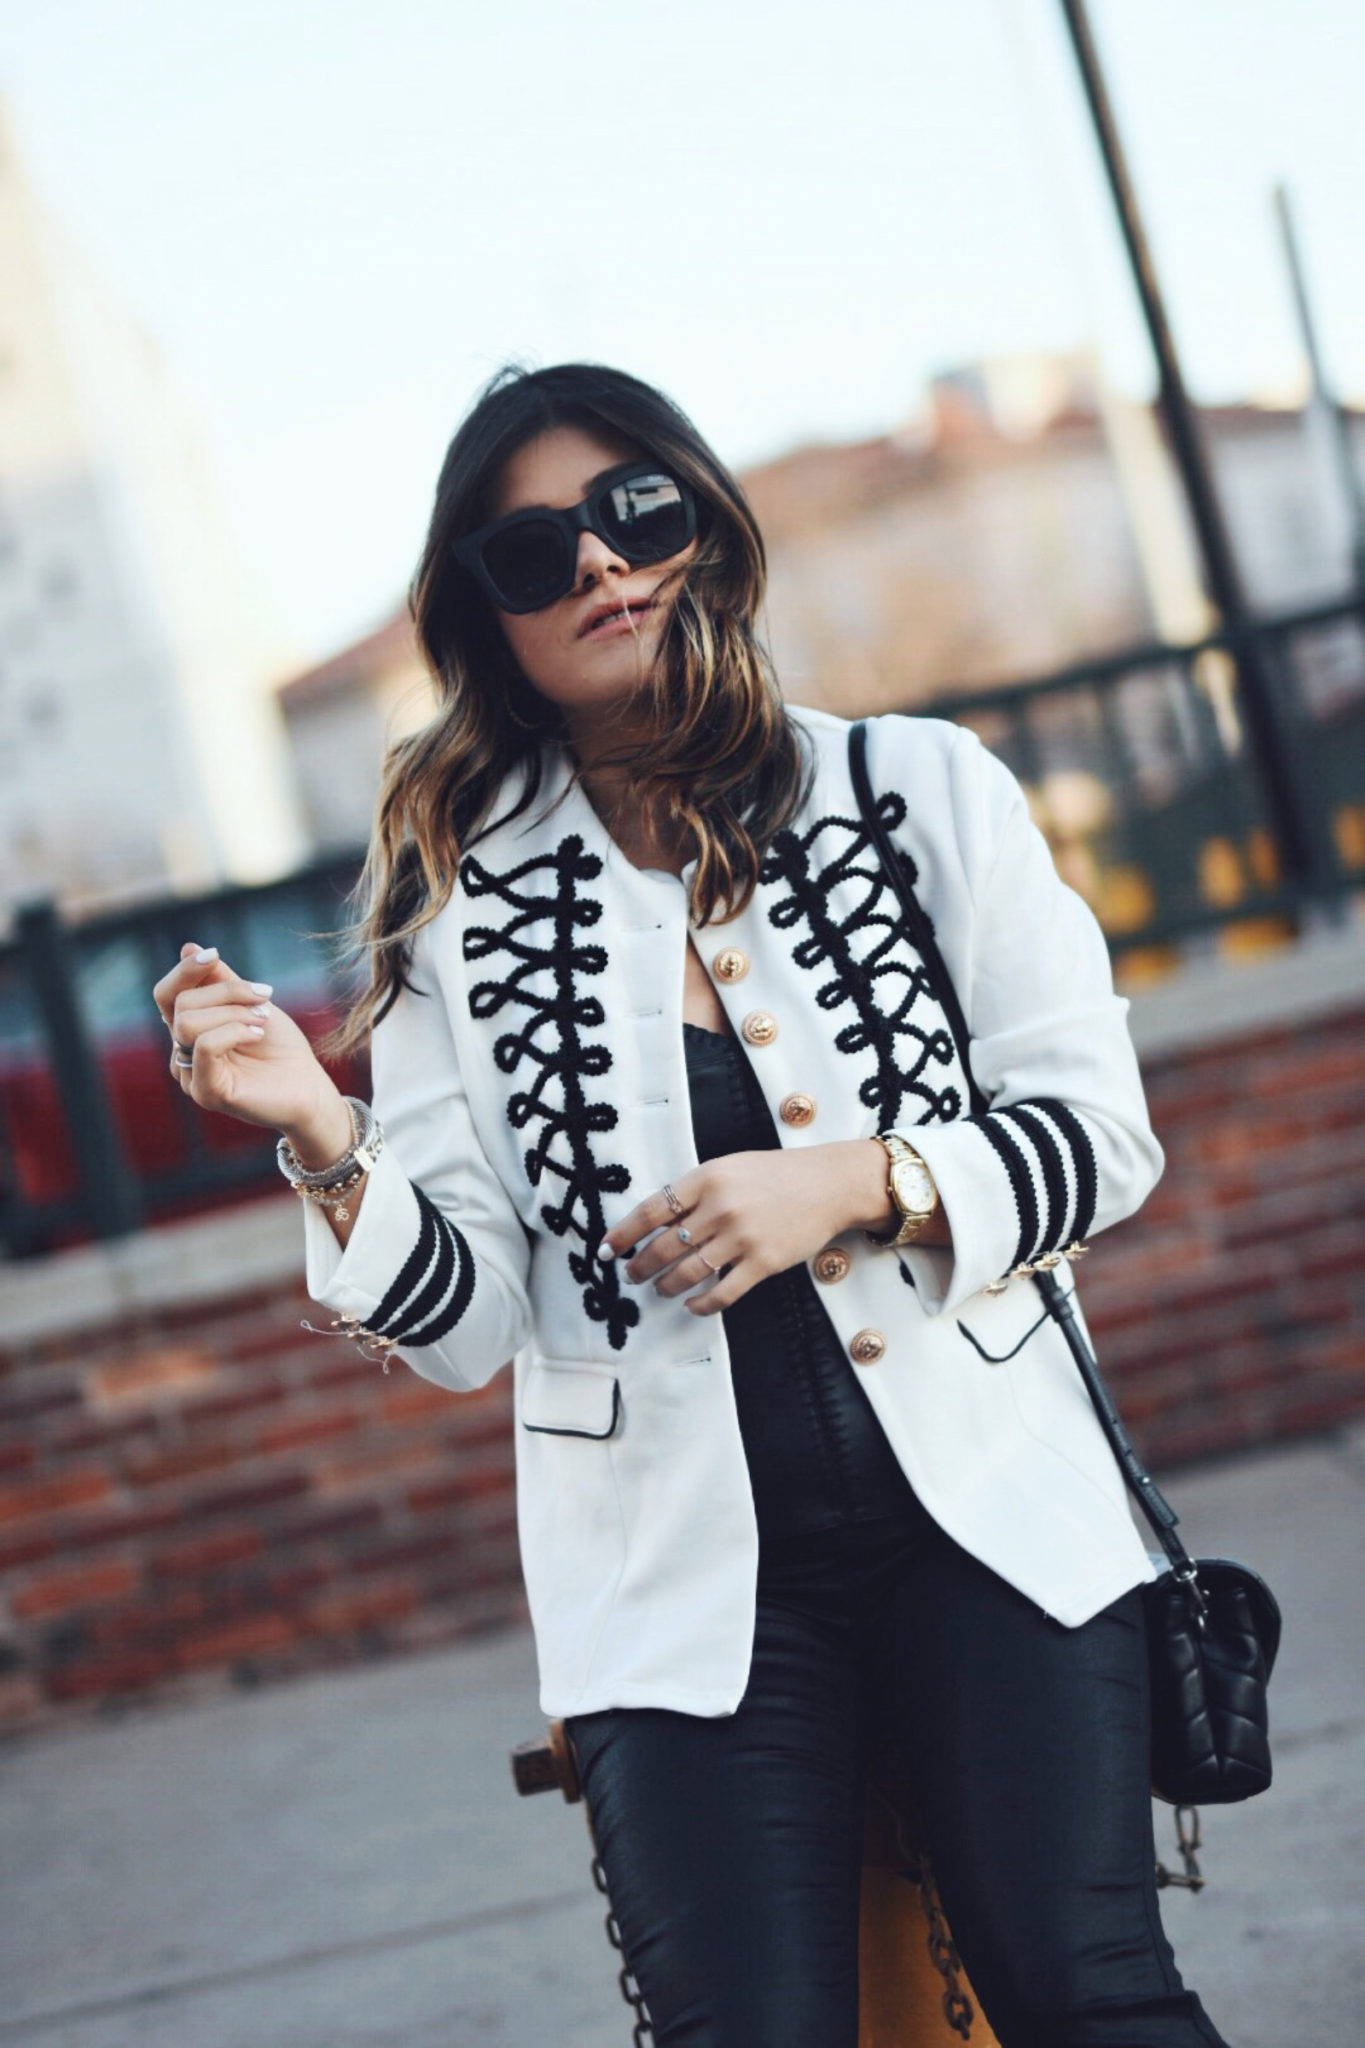 Carolina Hellal wearing a white military jacket, faux leather black tank top, YSL crossbody bag, quay sunglasses and Sam Edelman sandals - STYLING A WHITE MILITARY JACKET by popular Denver fashion blogger Chic Talk